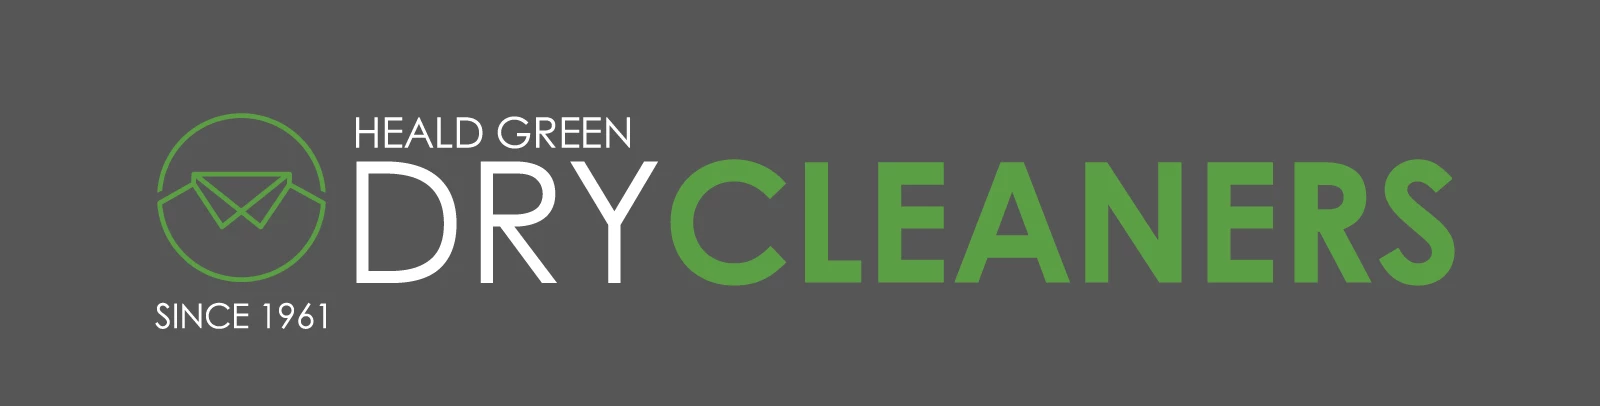 Heald Green Dry Cleaners Logo Link